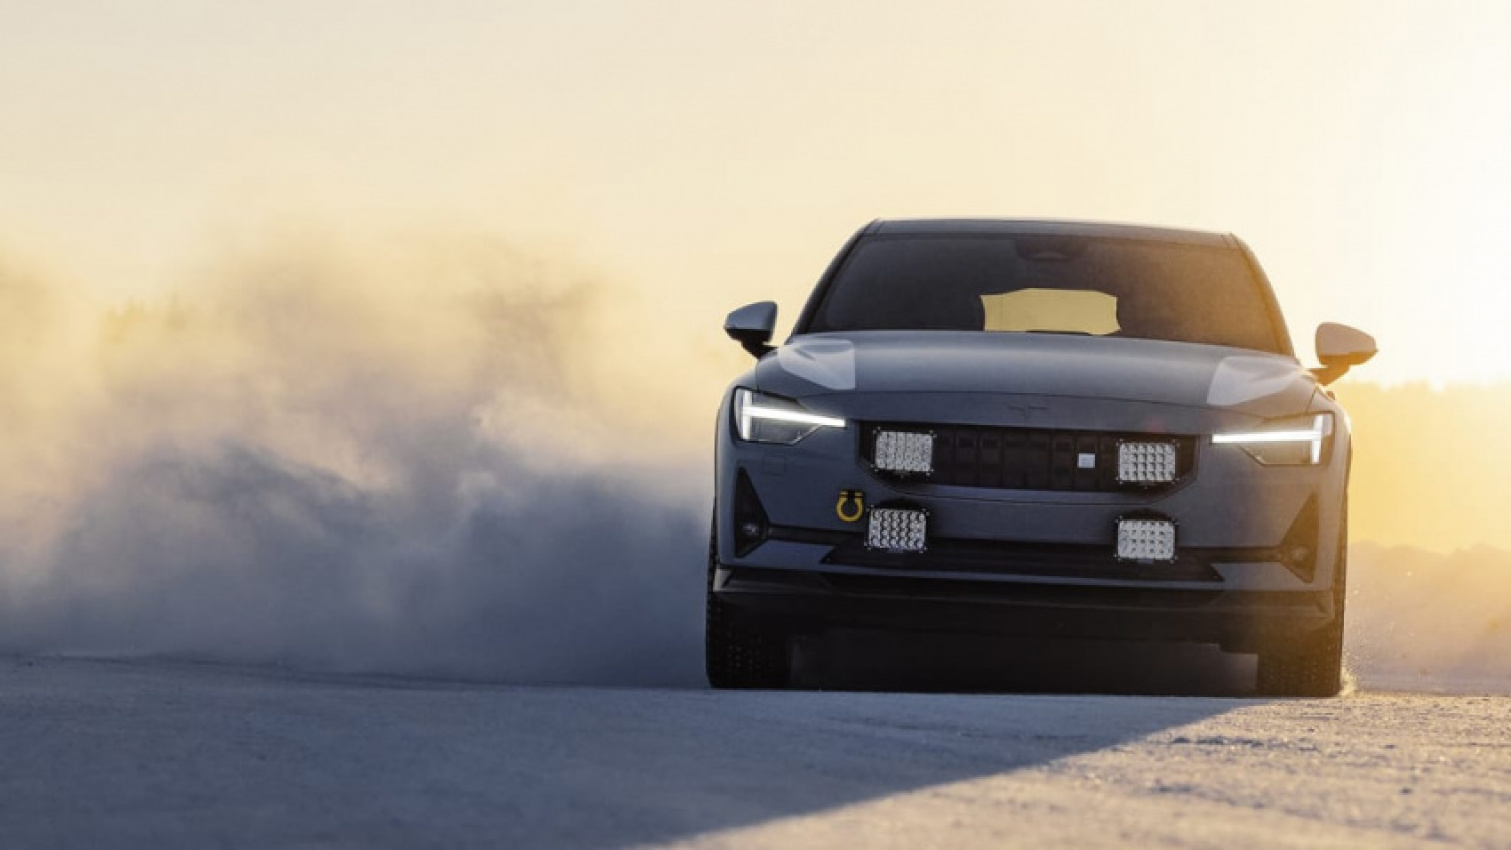 aftermarket, autos, cars, polestar, aftermarket, electric, green, performance, sedan, polestar 2 arctic circle concept aims for ultimate snow performance